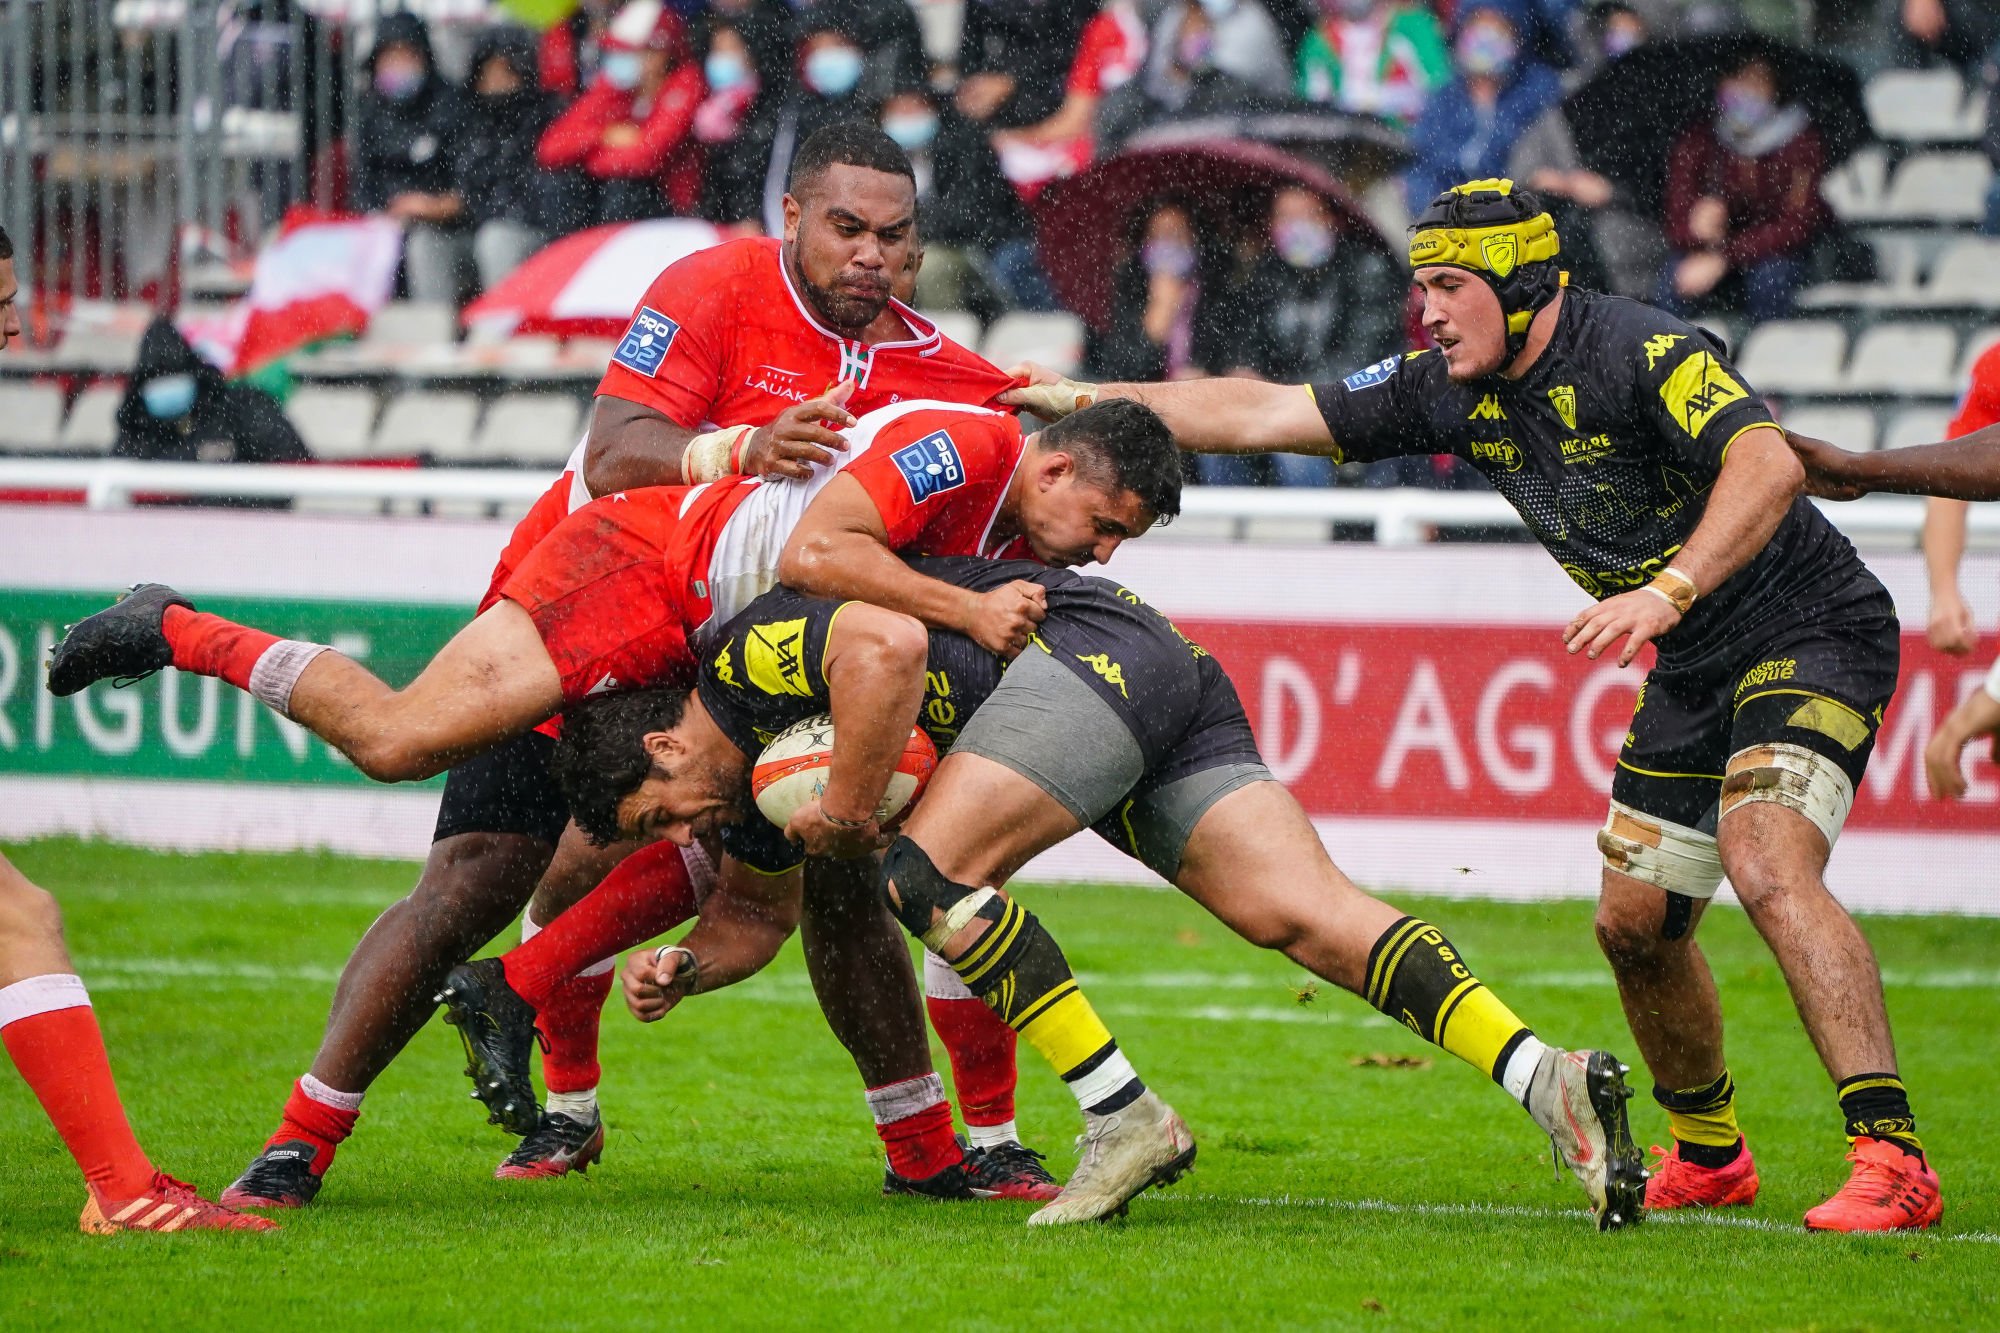 Gauthier DOUBRERE of Biarritz Olympique during the Pro D2 match between Biarritz and Carcassonne on October 11, 2020 in Biarritz, France. (Photo by Pierre Costabadie/Icon Sport) - Gauthier DOUBRERE - Parc des Sports d'Aguilera - Biarritz (France)